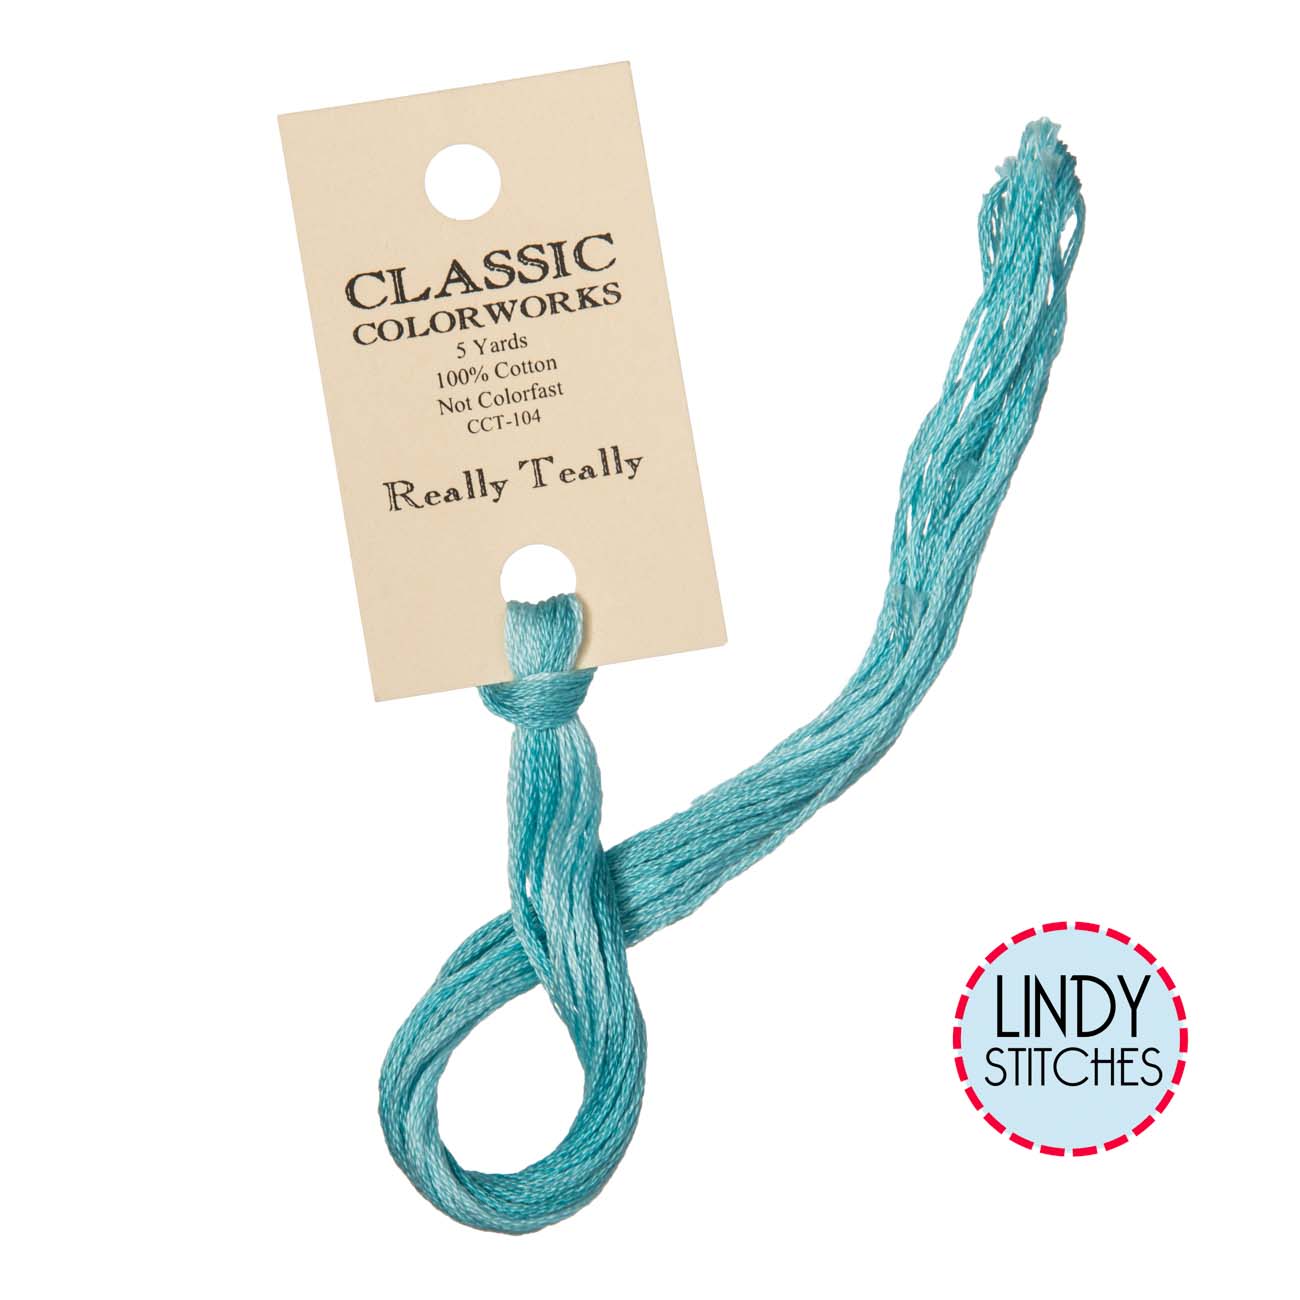 Really Teally Classic Colorworks Floss Hand Dyed Cotton Skein